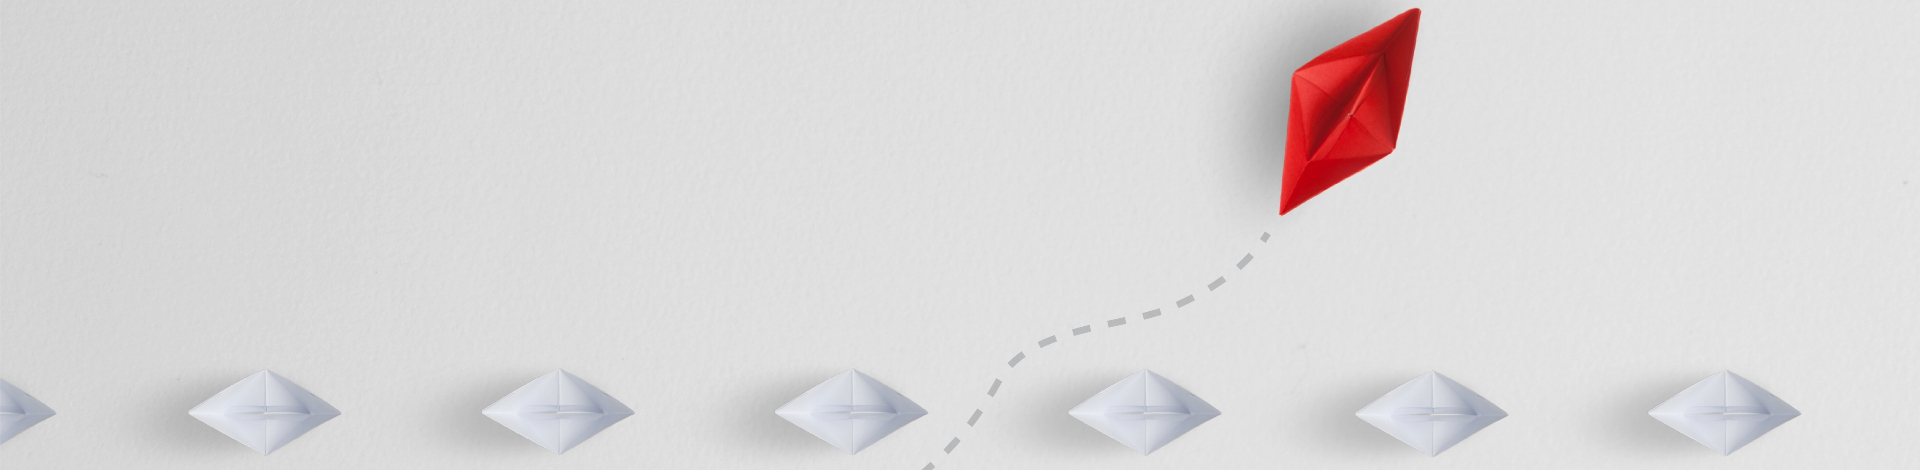 A red paper plane flying ahead of a row of white paper boats on a white background, depicted with a dashed trail indicating its movement.